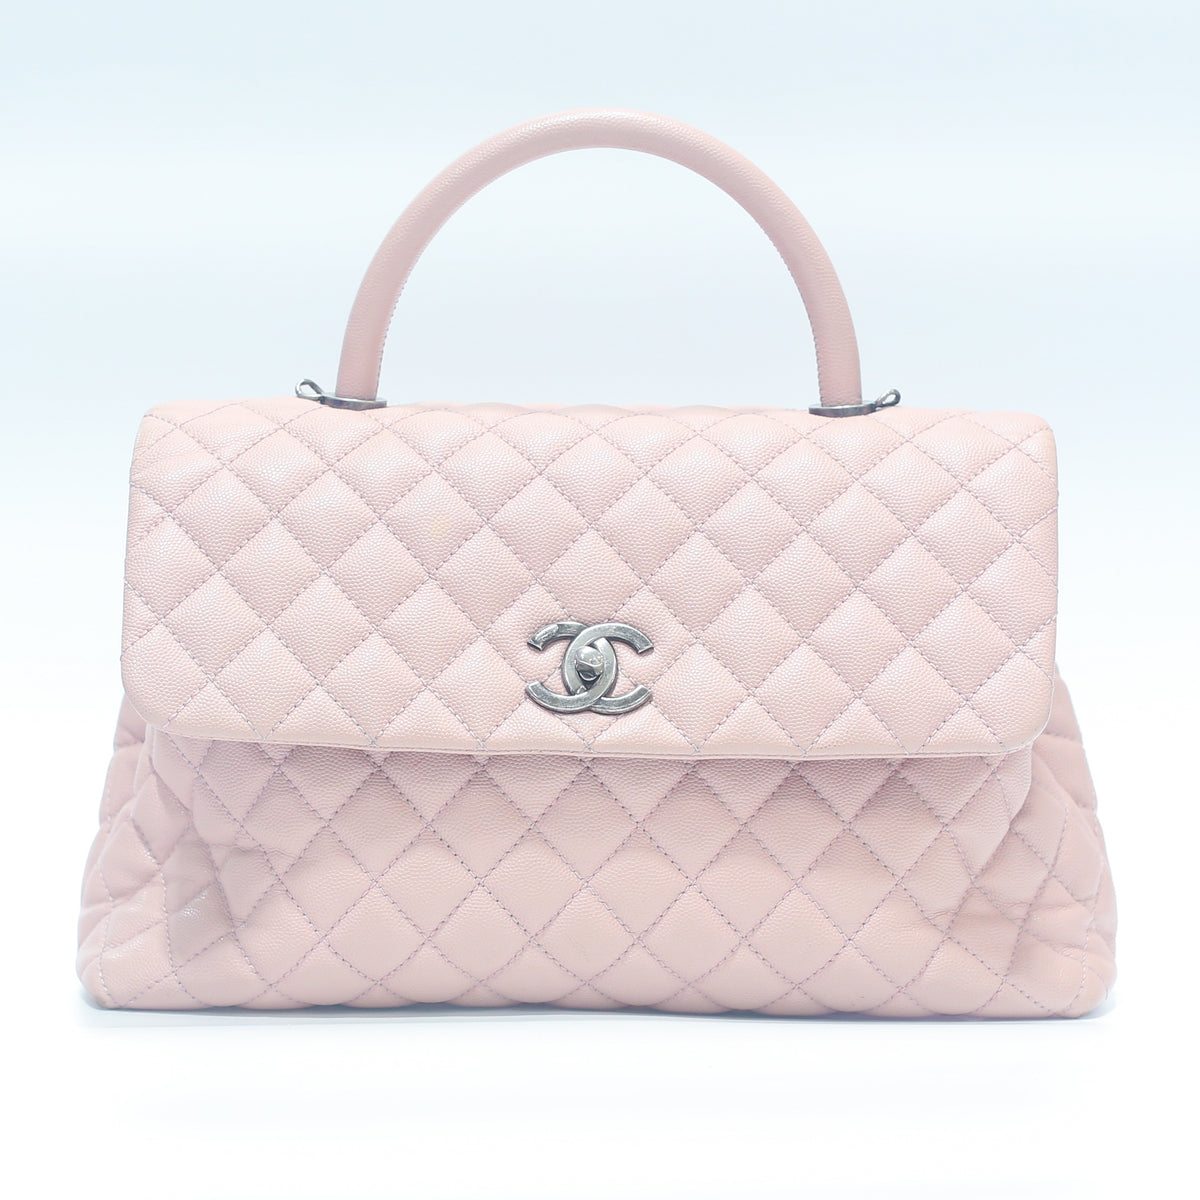 Chanel Caviar Quilted Medium Coco Handle Flap Bag